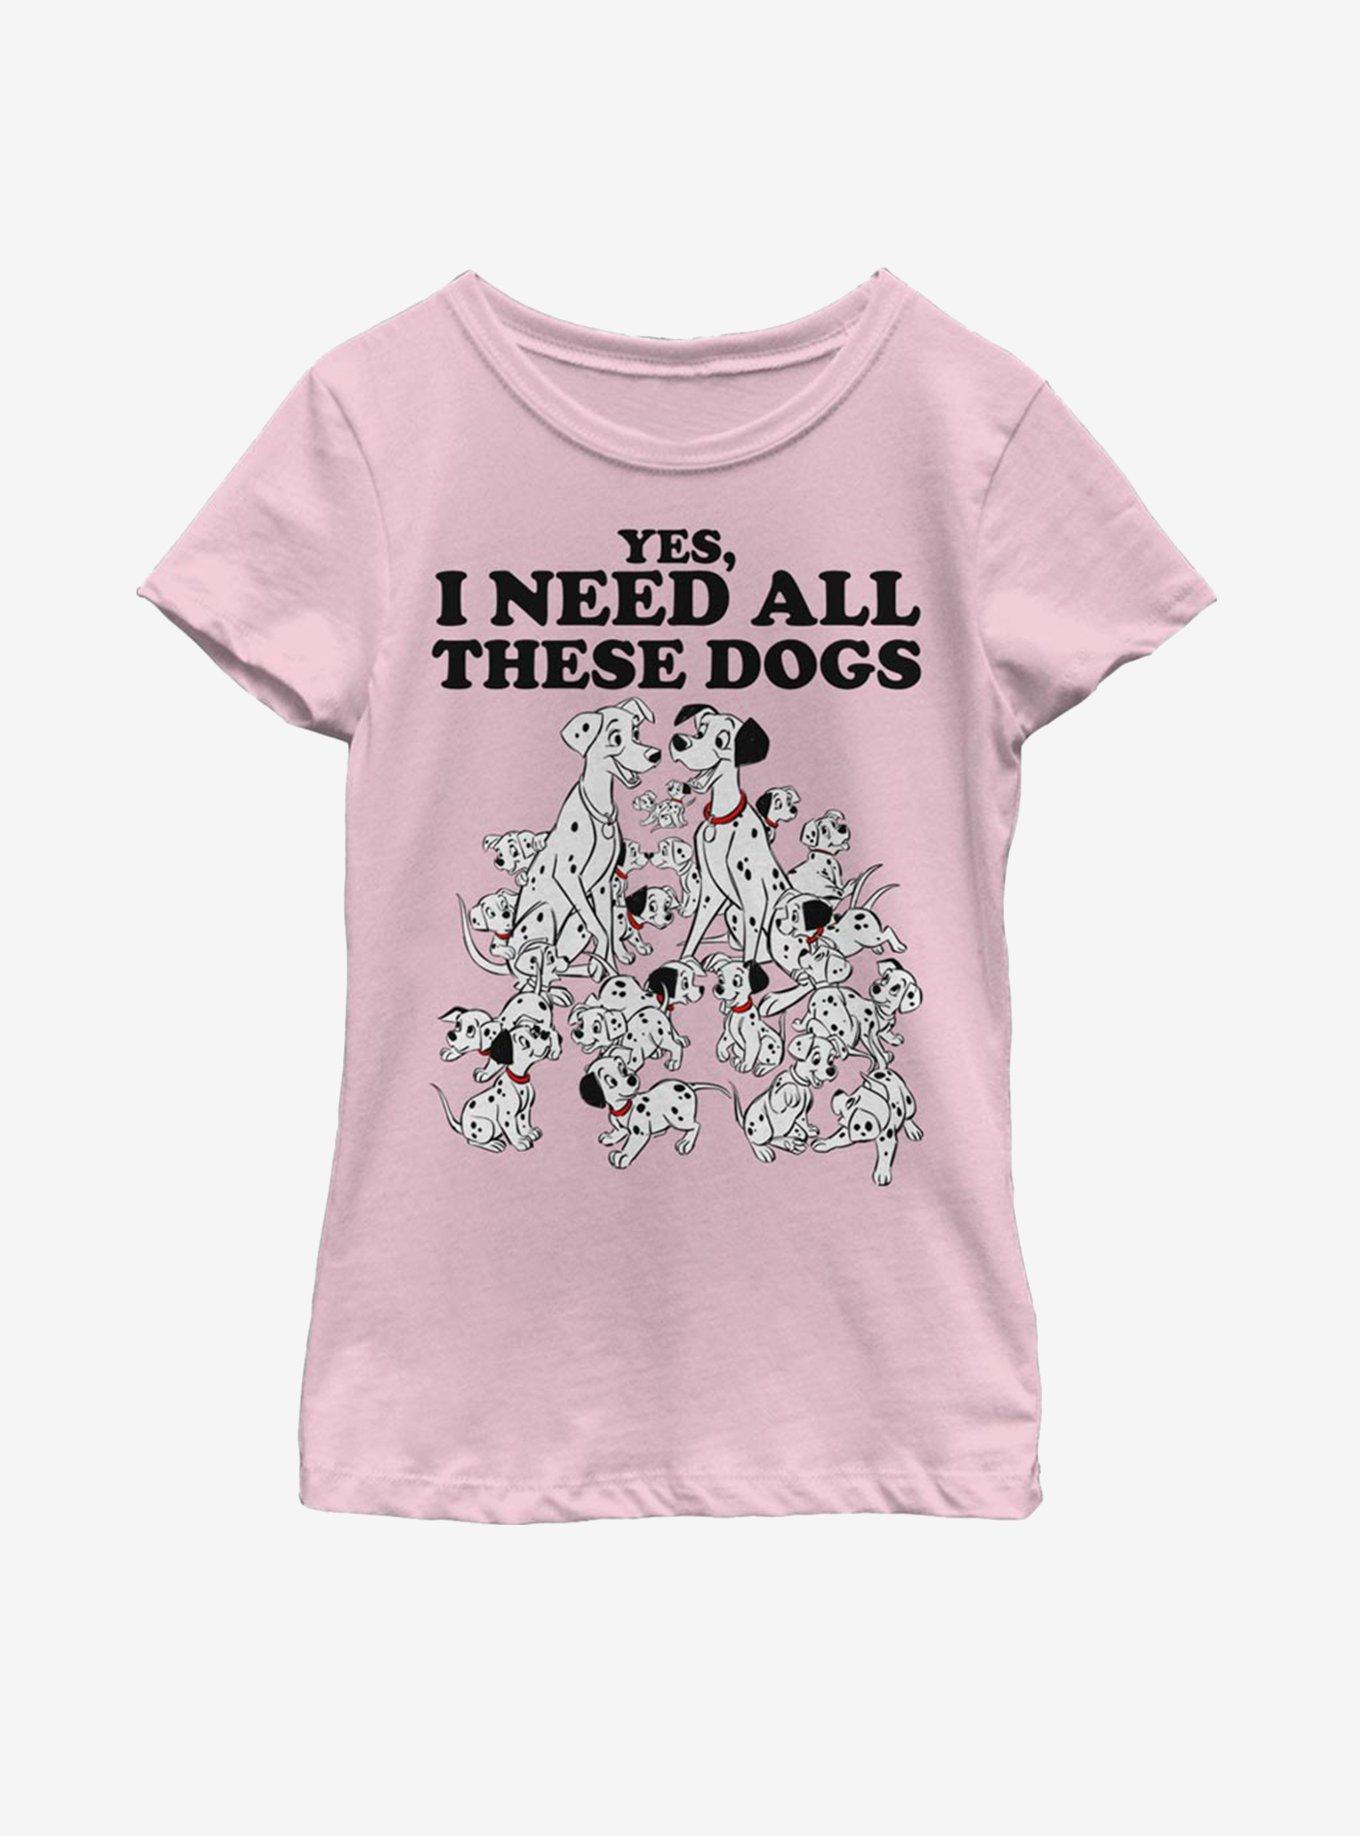 Disney 101 Dalmatians All These Dogs Youth Girls T-Shirt, PINK, hi-res